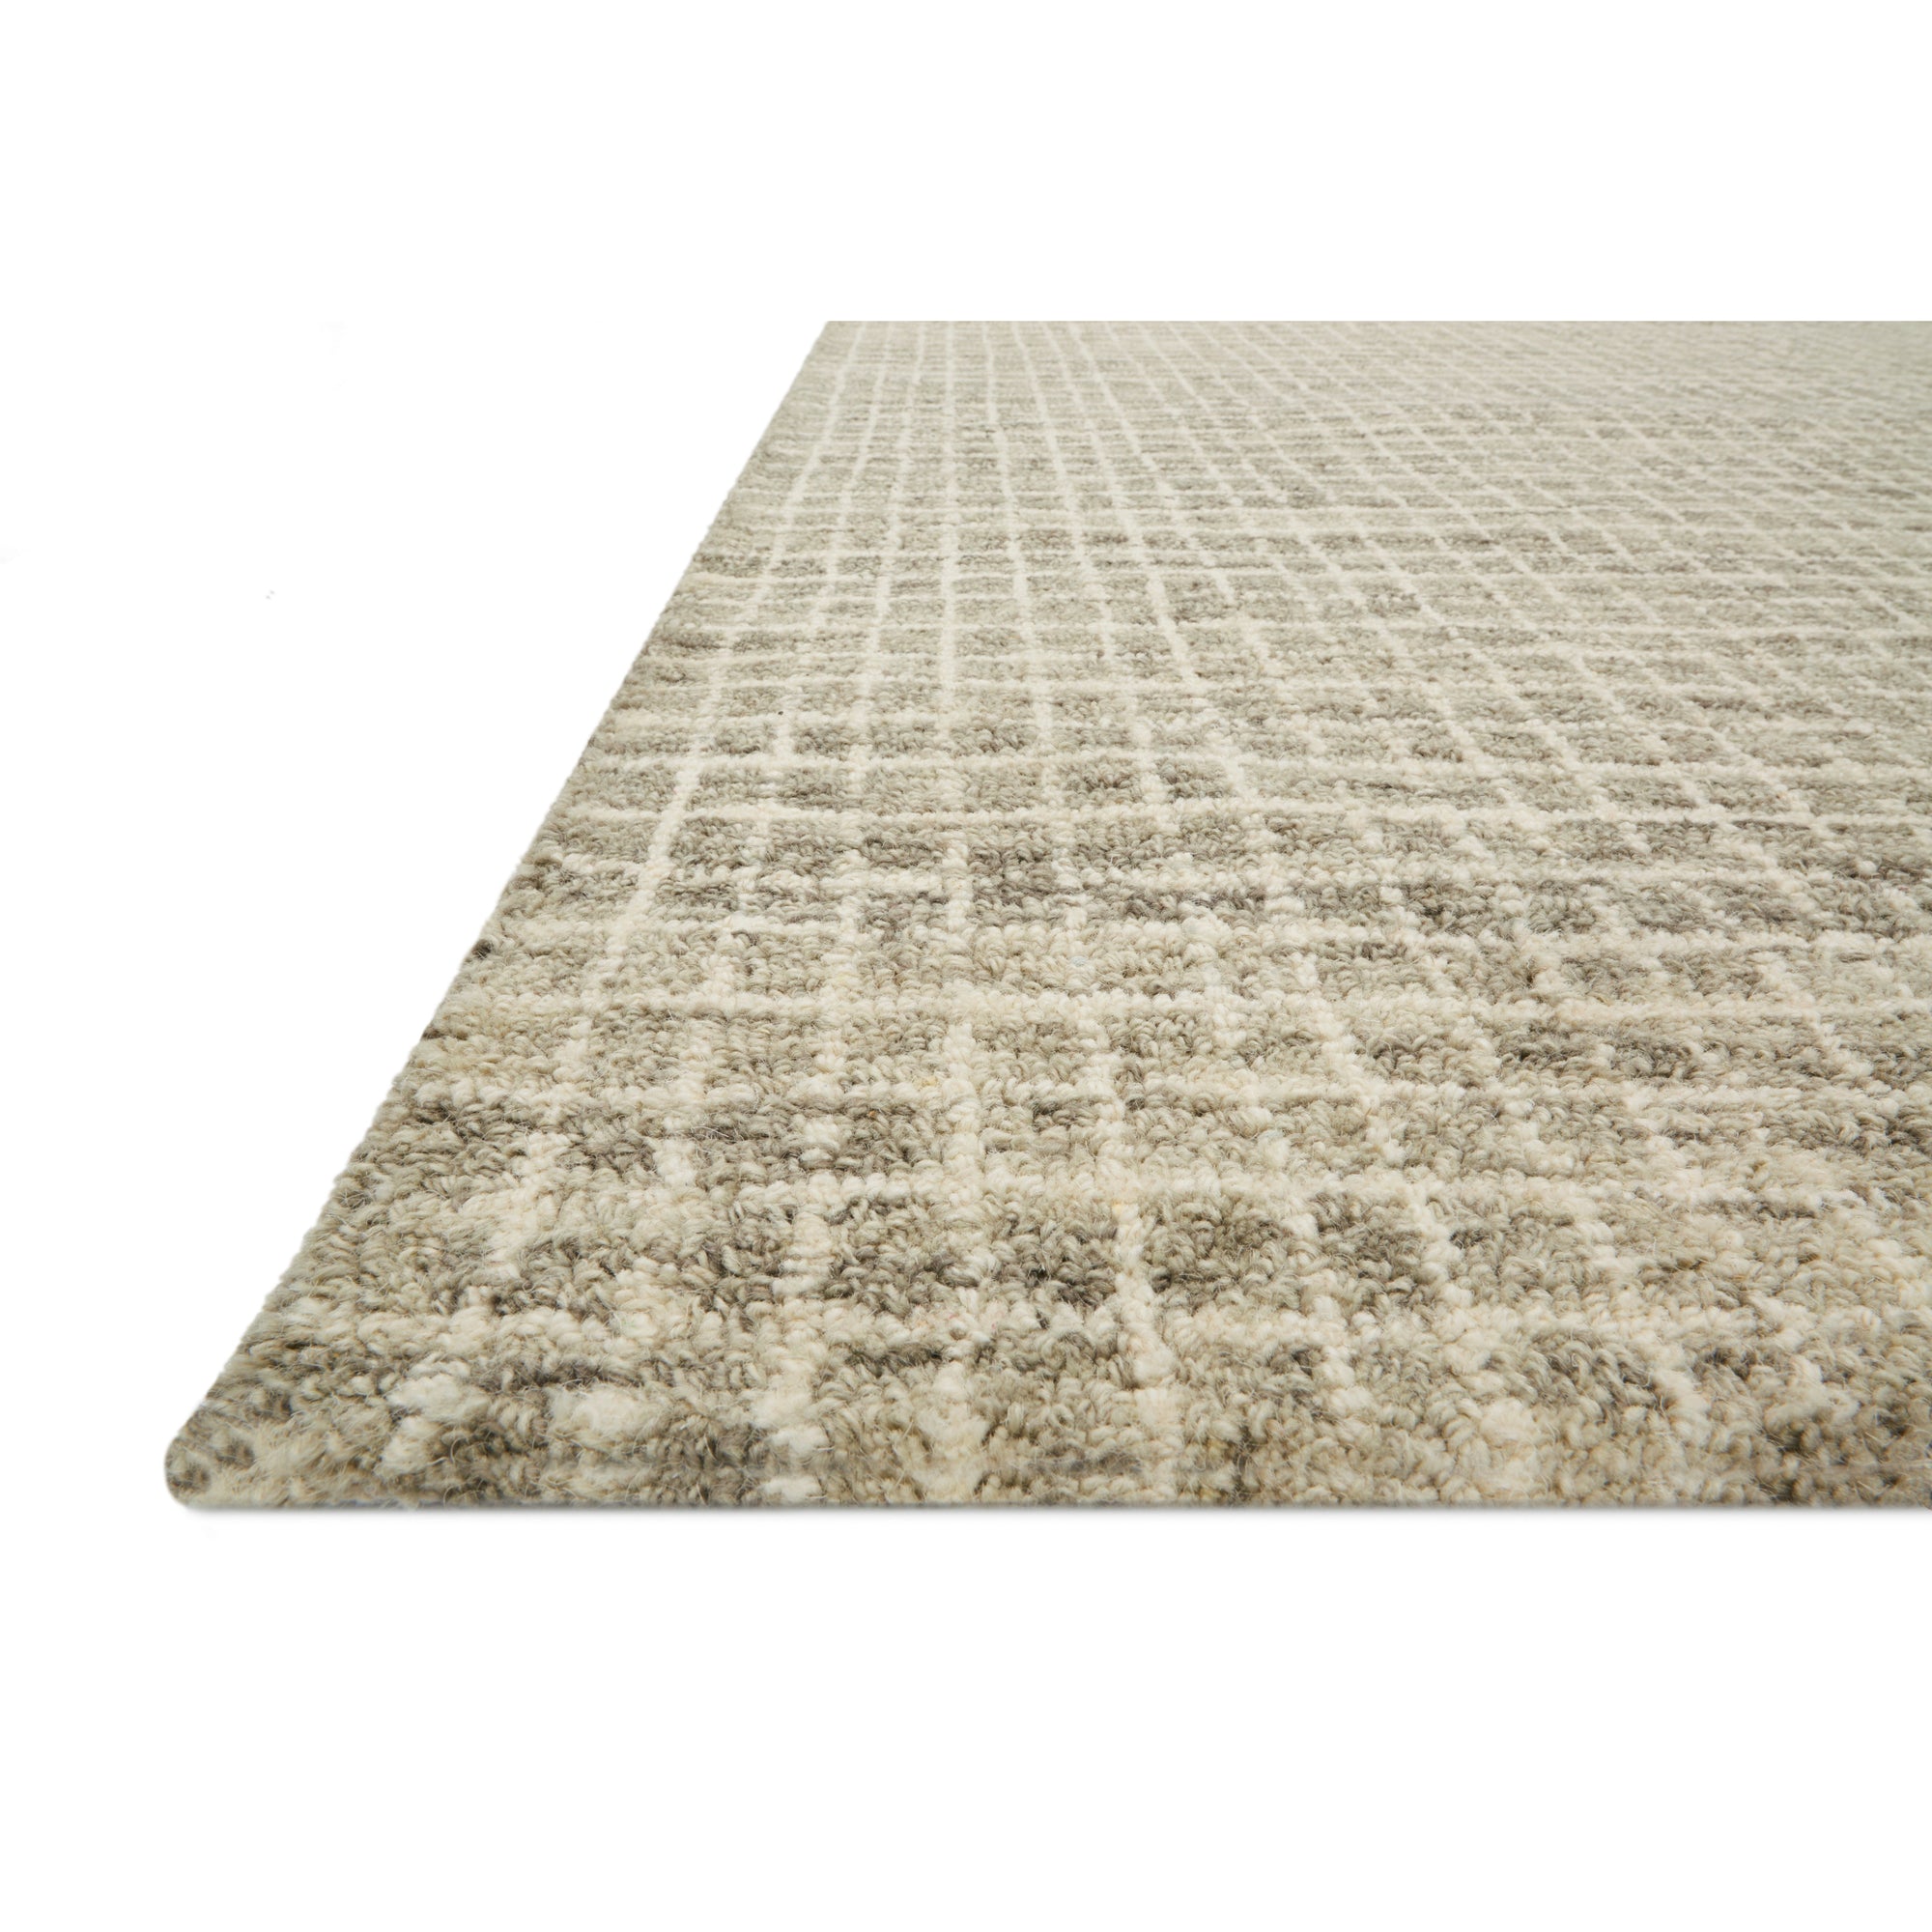 Rugs by Roo Loloi Giana Granite Area Rug in size 2' 6" x 7' 6"